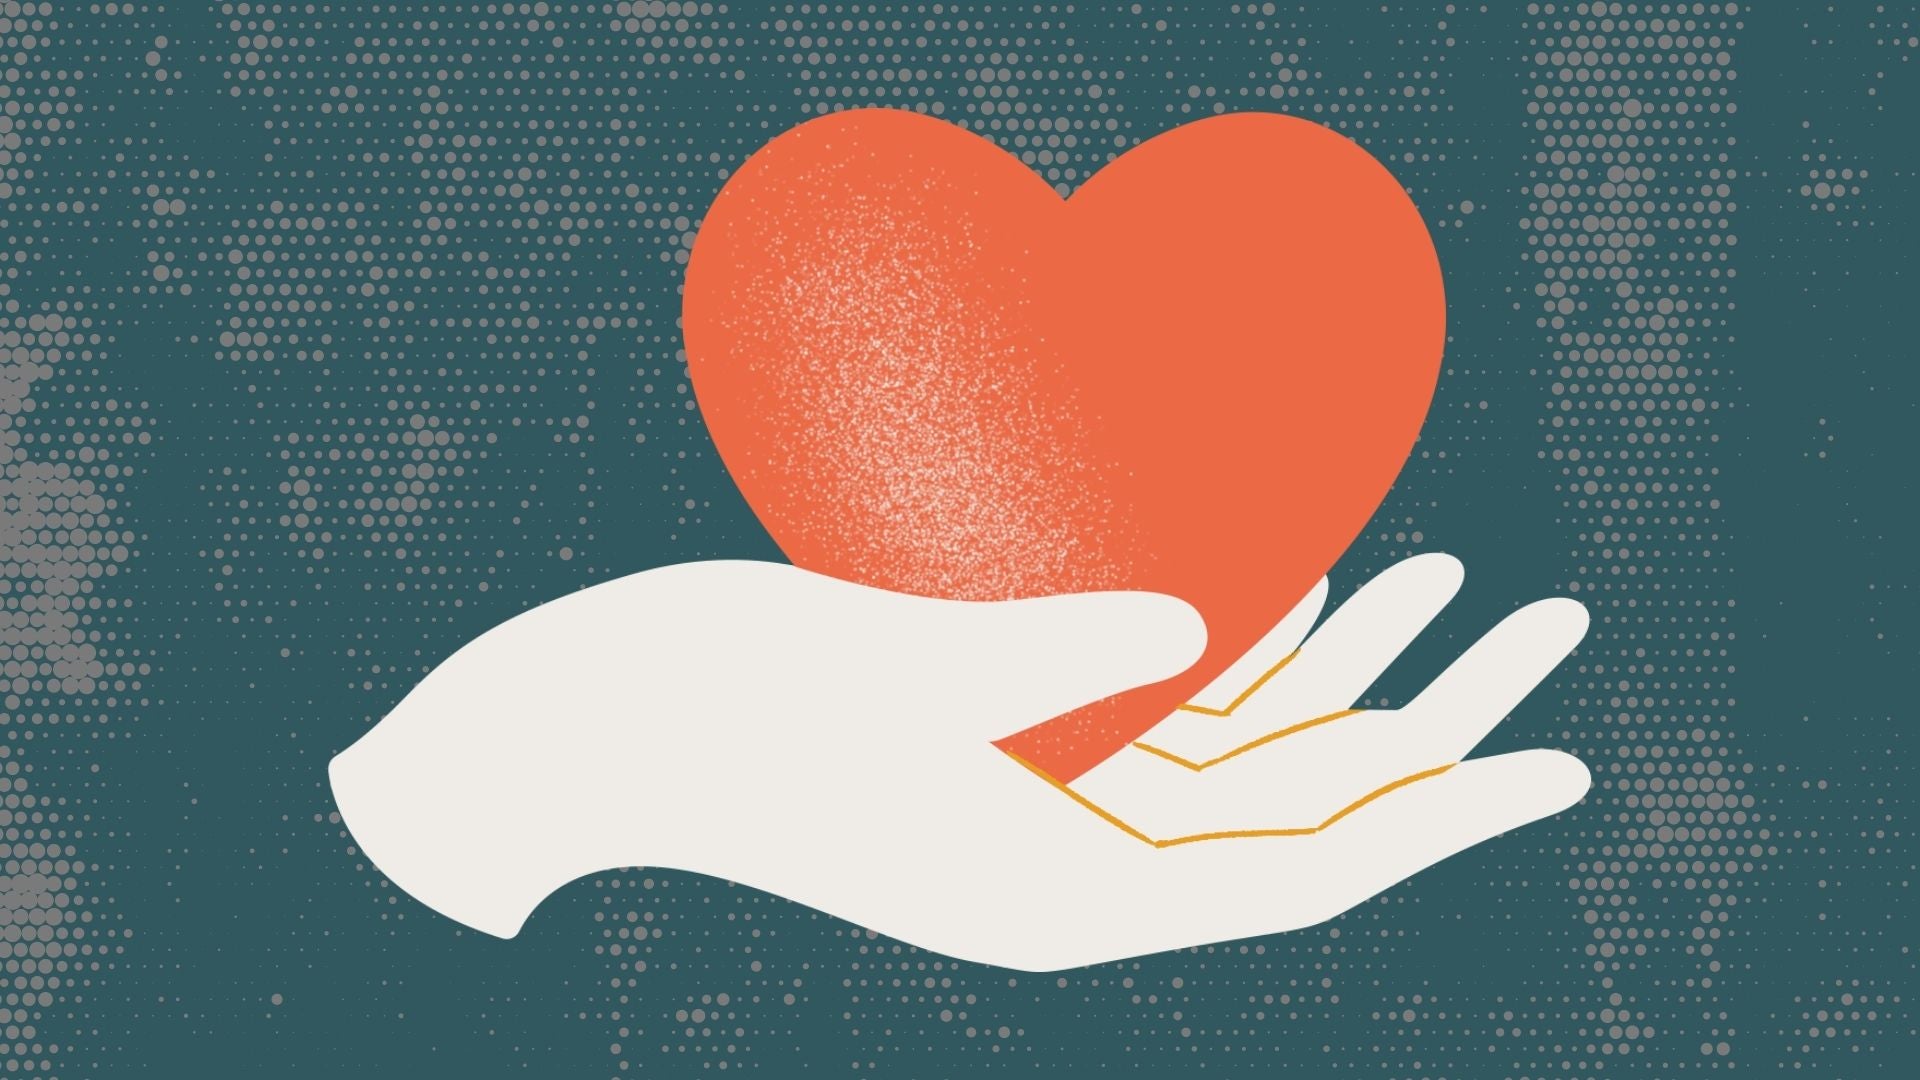 An illustration of a hand holding a heart on a patterned background